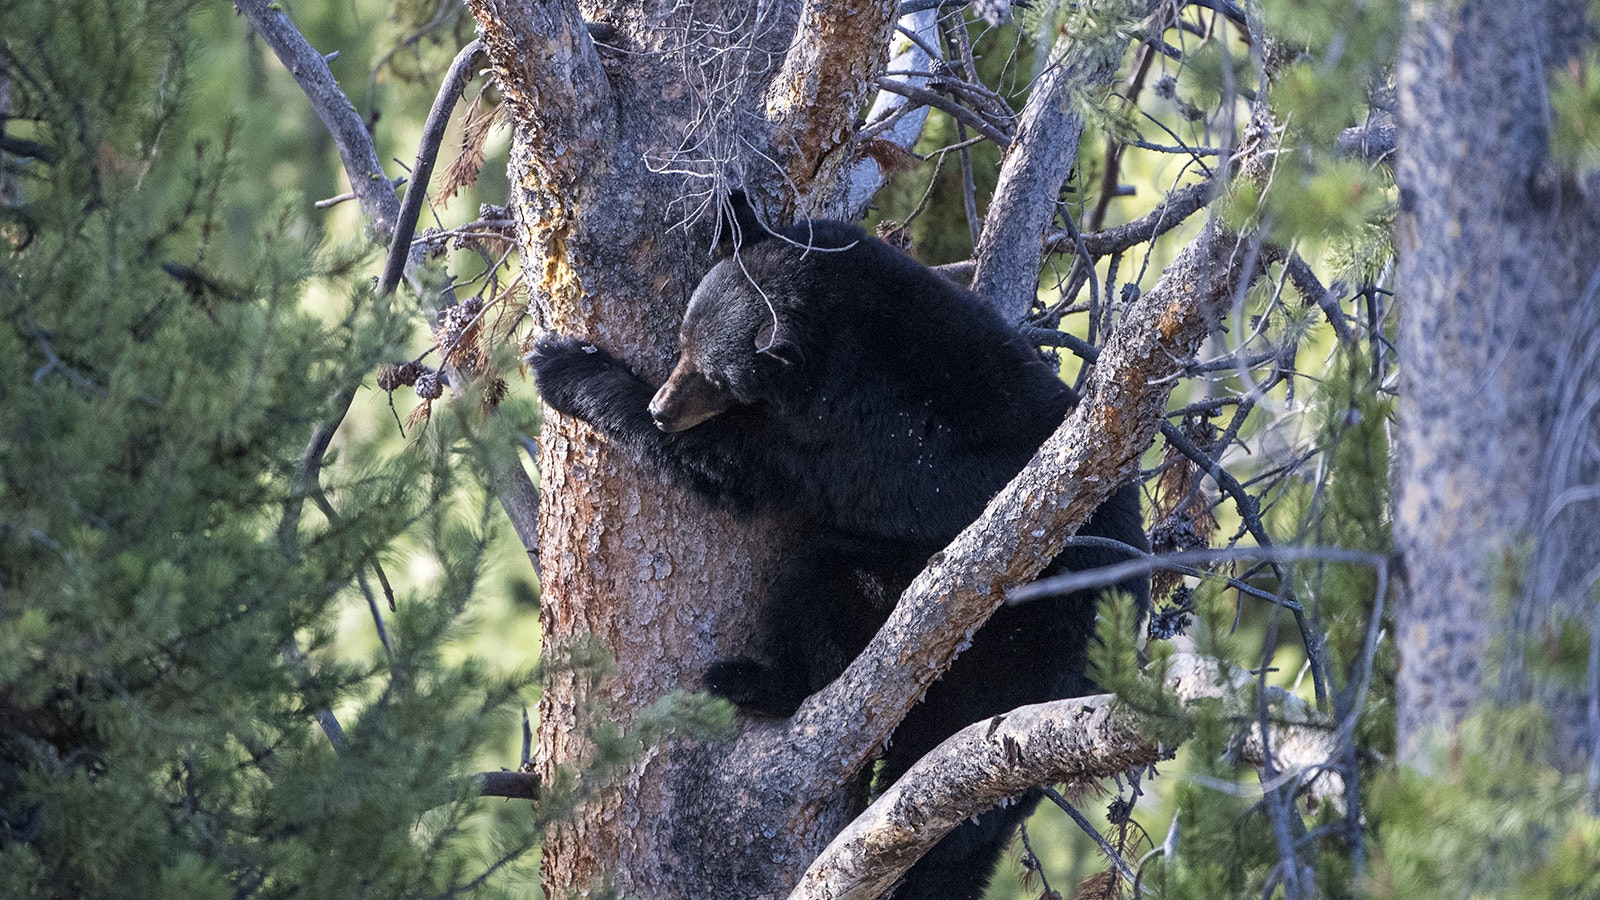 Black bears are good tree climbers, and have been known to follow people up trees on occassion.